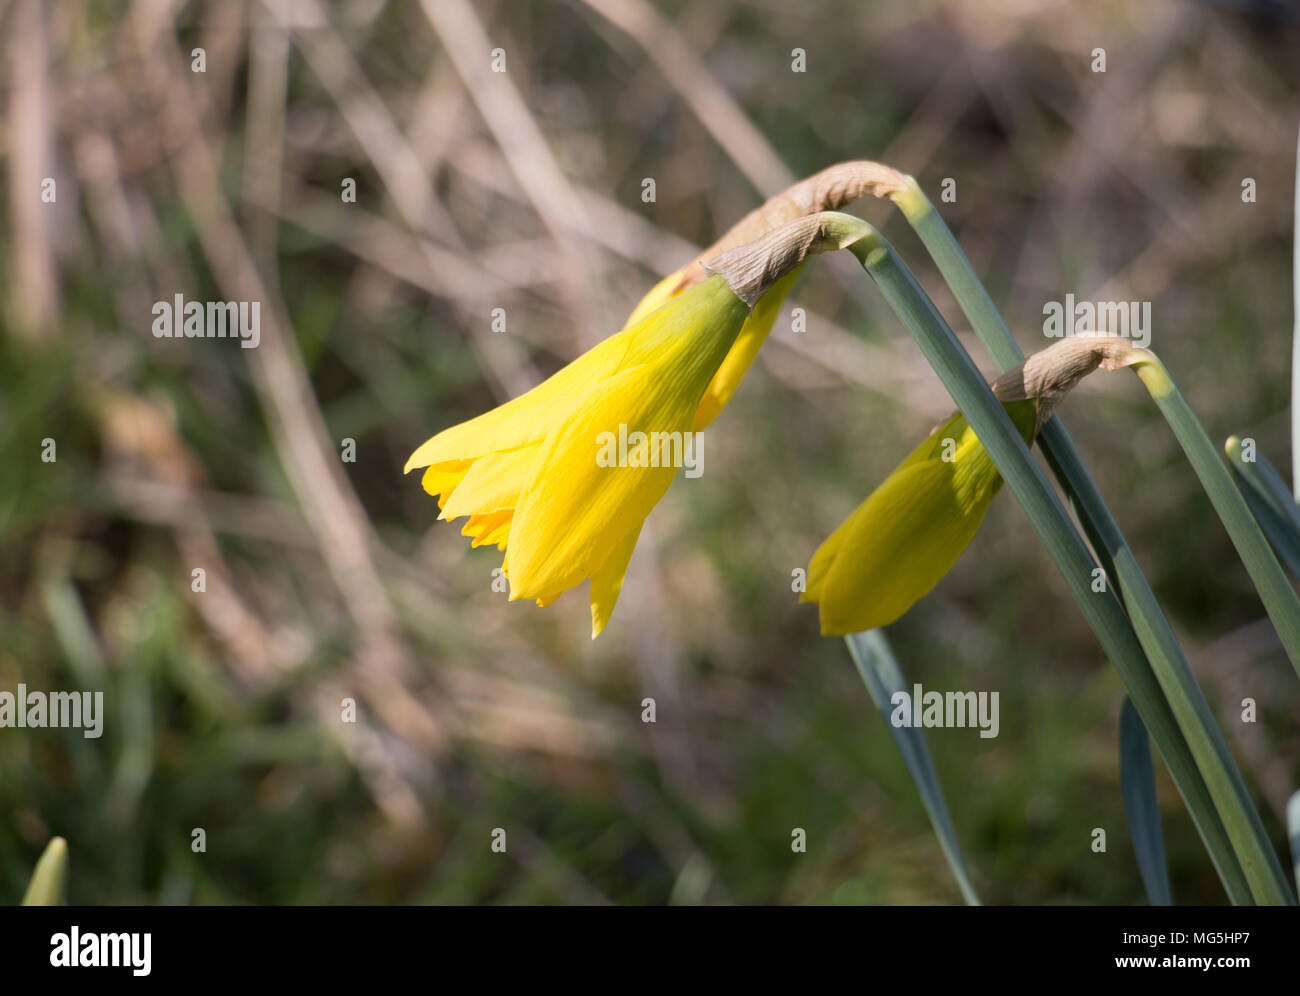 Yellow daffodil flower buds, Narcissus opening in the spring sunlight Stock Photo